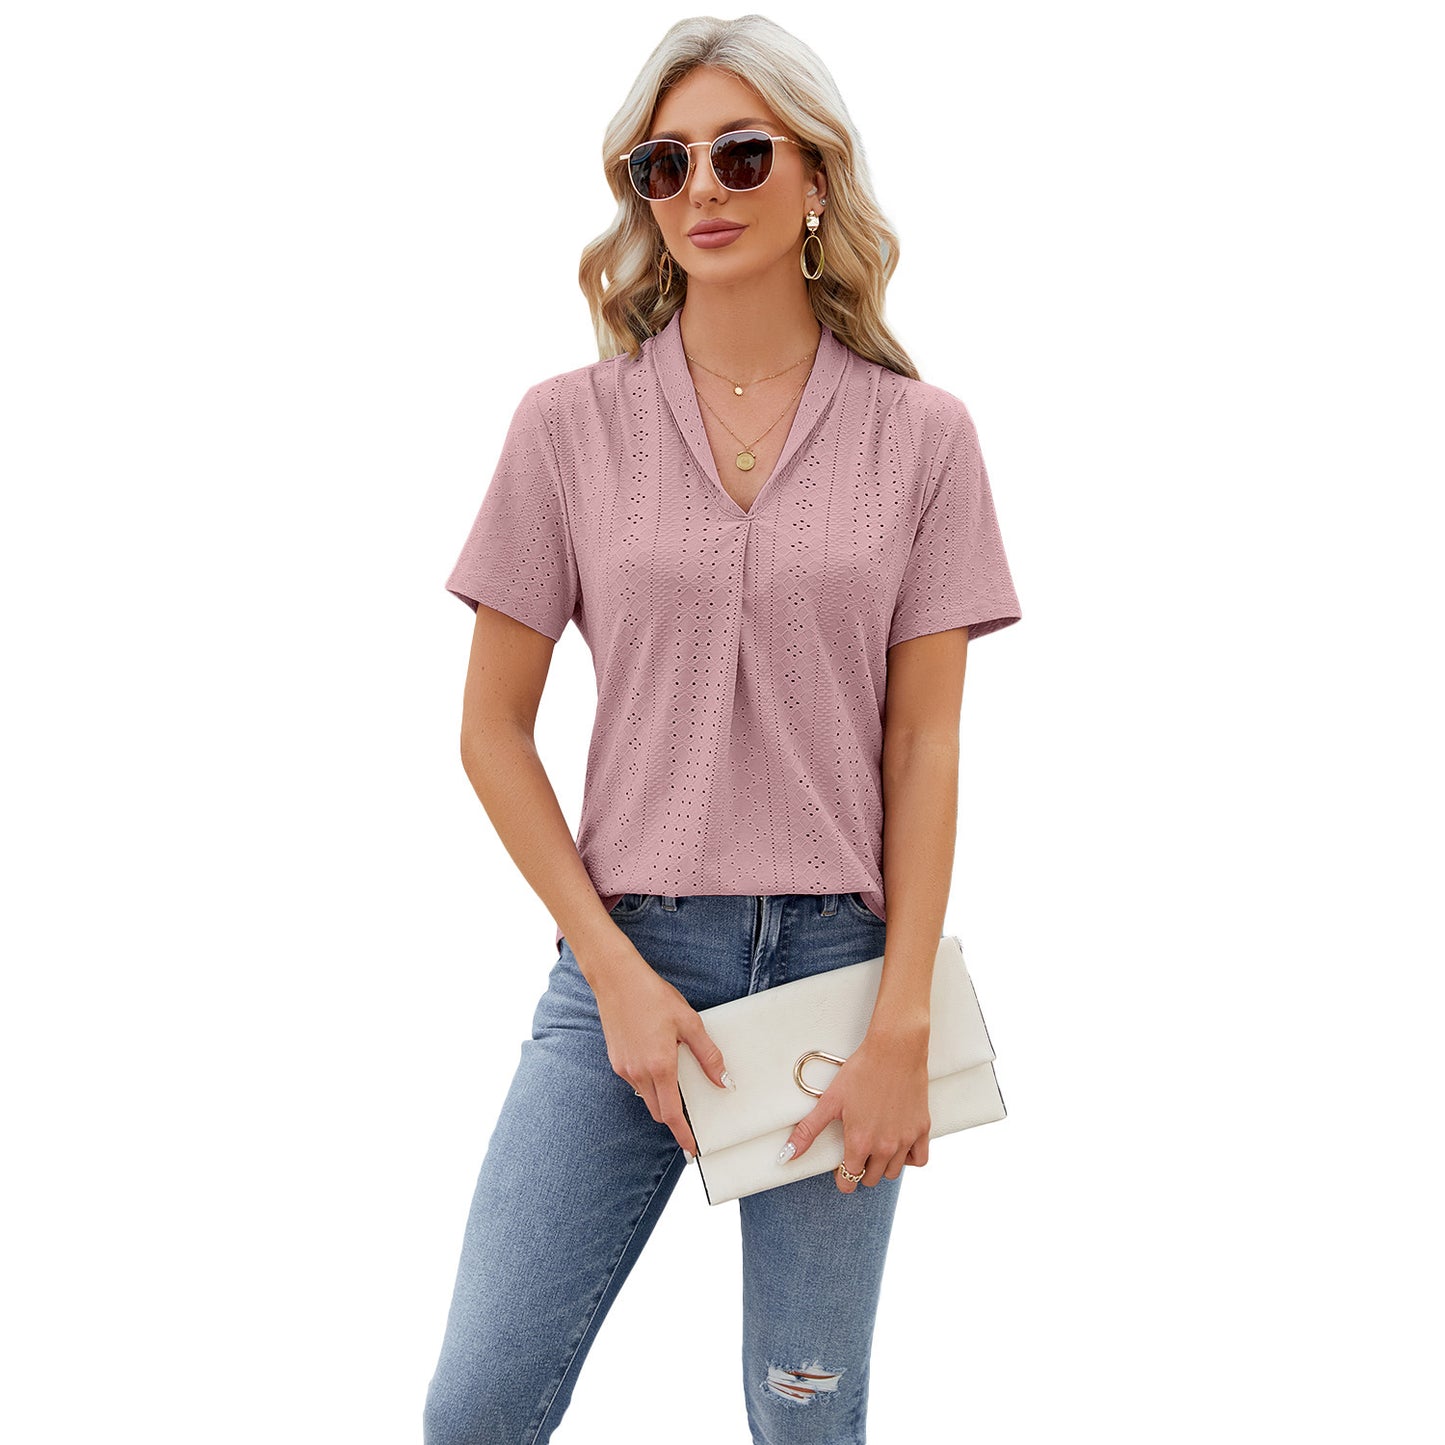 V-neck Hollow Design T-shirt Summer Loose Short-sleeved Top For Womens Clothing